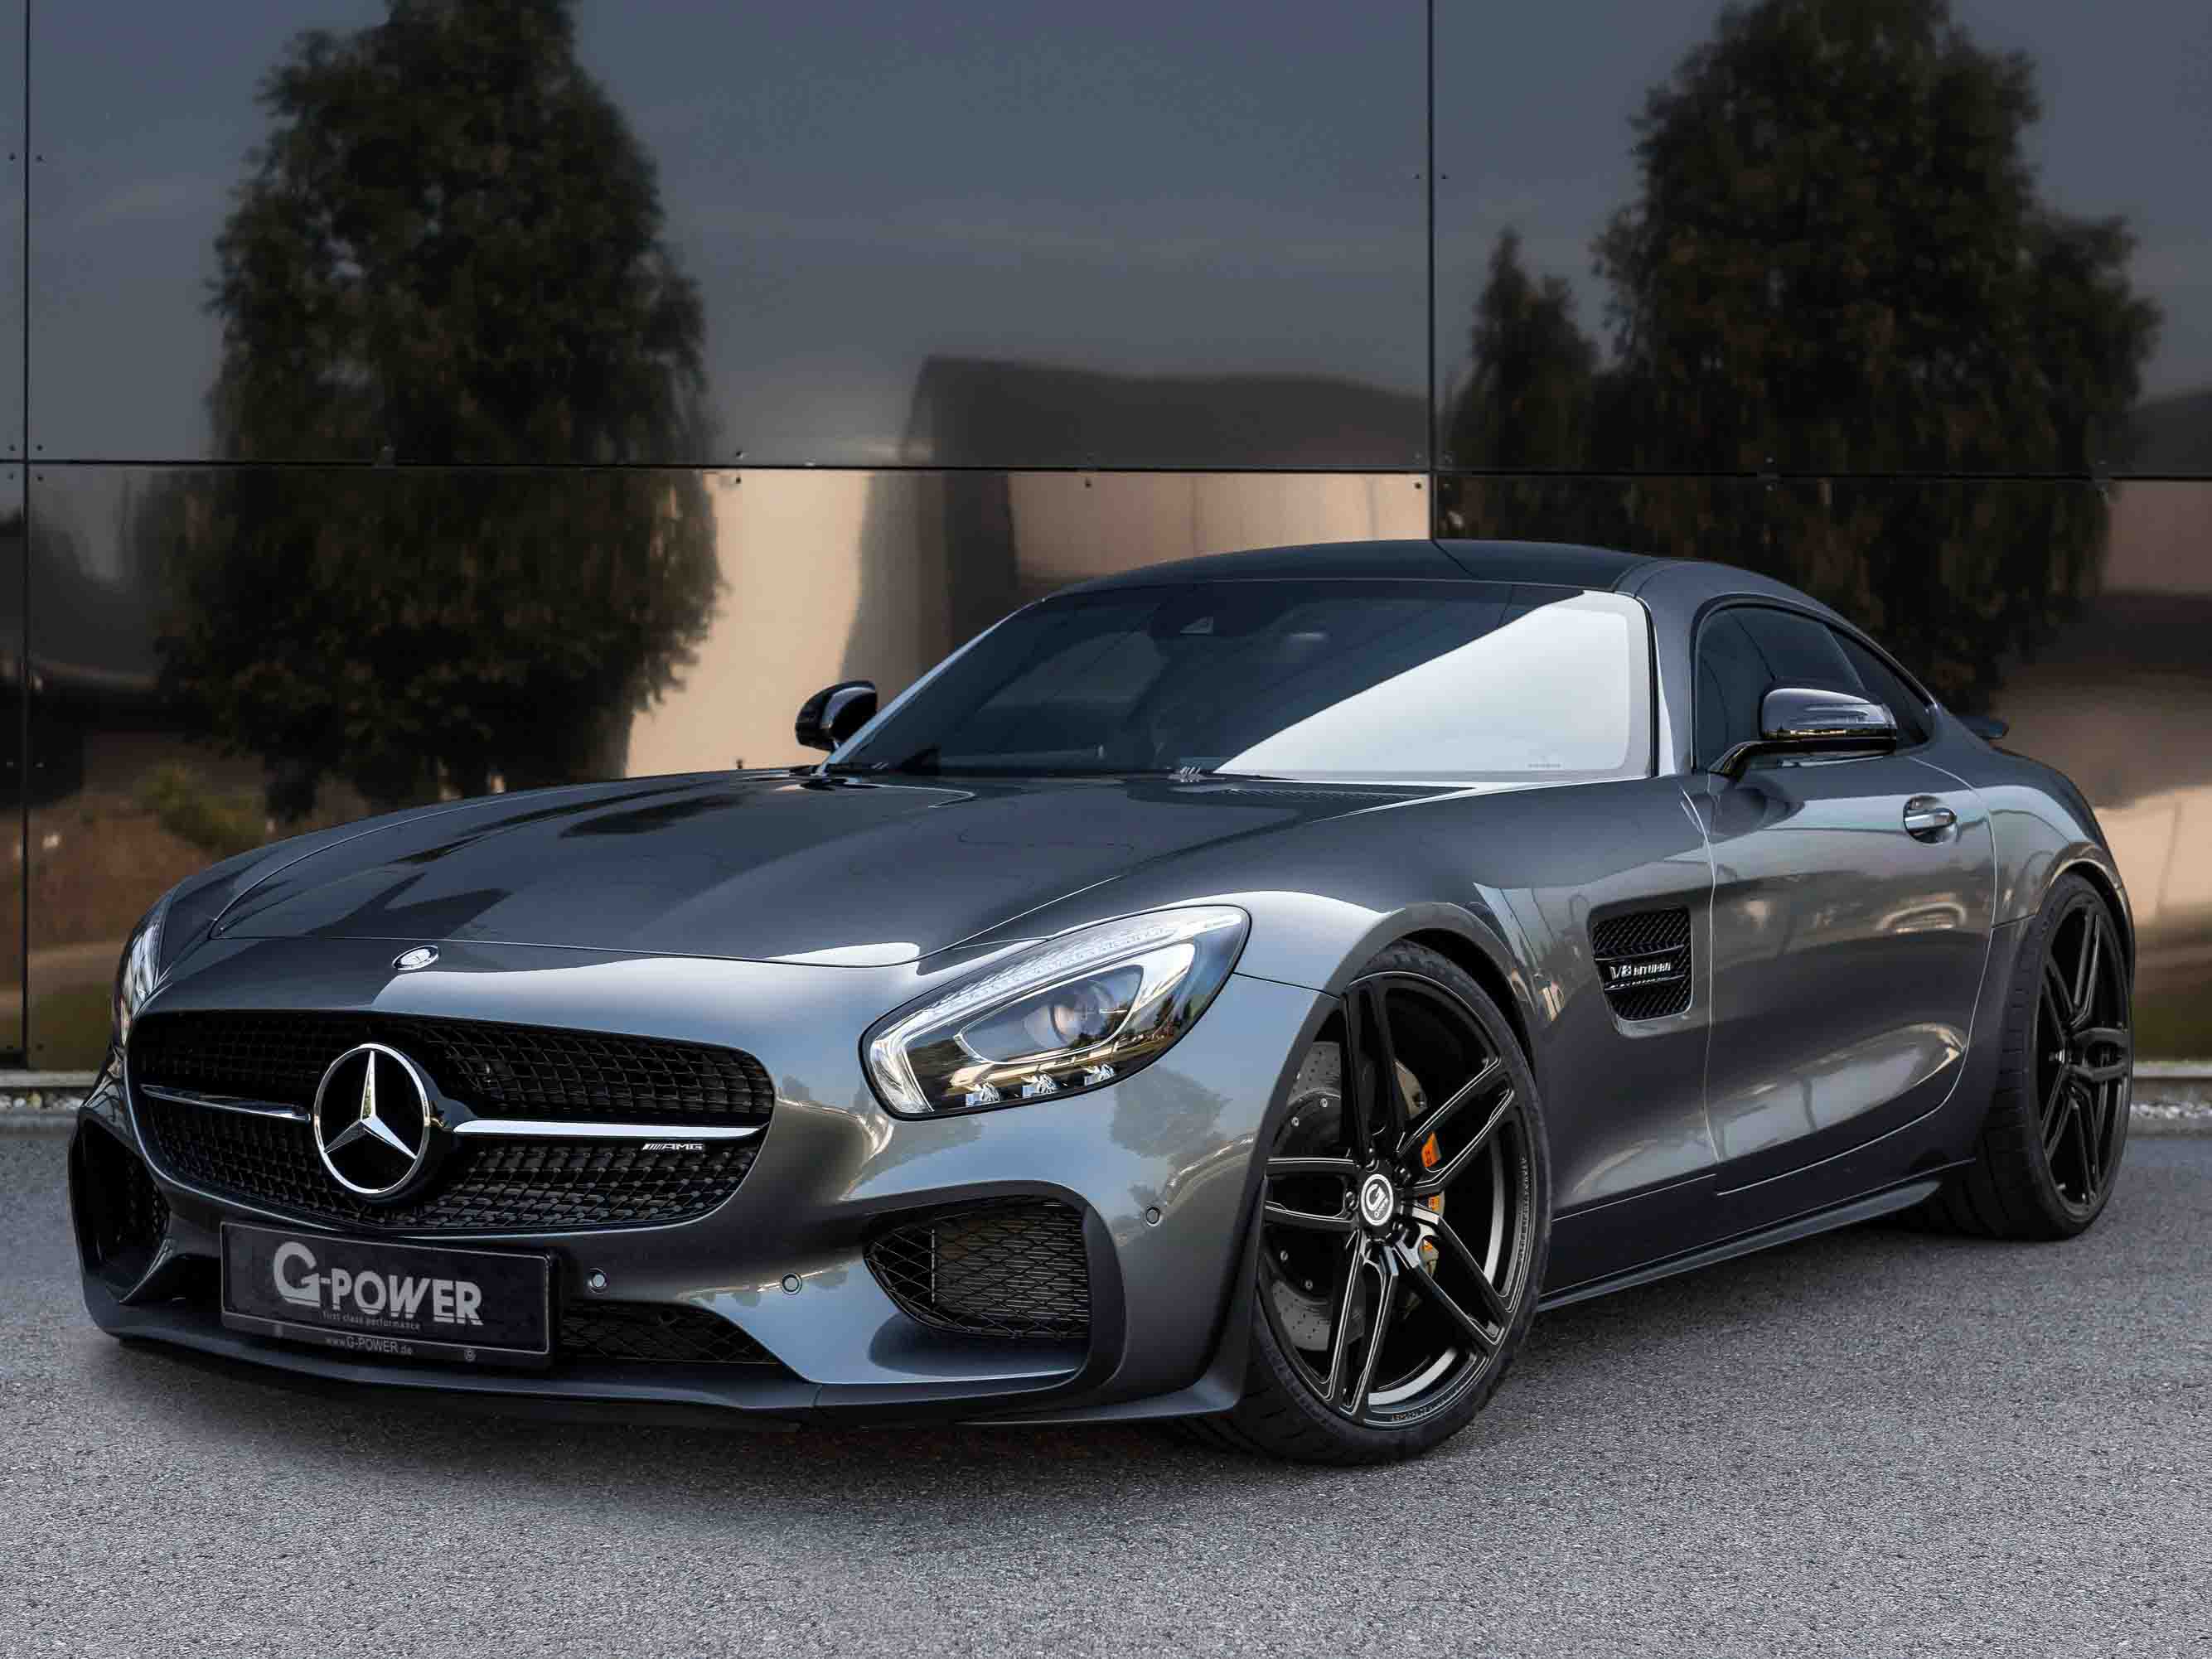 The Mercedes-AMG GT (C190 / R190) is a 2-door, 2-seat sports car produced in coupé and roadster form by Mercedes-AMG. The car was introduced on 9 September 2014 and was officially unveiled to the public in October 2014 at the Paris Motor Show.[4] After the SLS AMG, it is the second sports car developed entirely in-house by Mercedes-AMG. The Mercedes-AMG GT went on sale in two variants (GT and GT S) in March 2015, while a GT3 racing variant of the car was introduced in 2015. A GT4 racing variant, targeted at semi-professional drivers and based on the GT R variant, was introduced in 2017. All variants are assembled at the Mercedes-Benz plant in Sindelfingen, Germany.https://en.wikipedia.org/wiki/Mercedes-AMG_GT